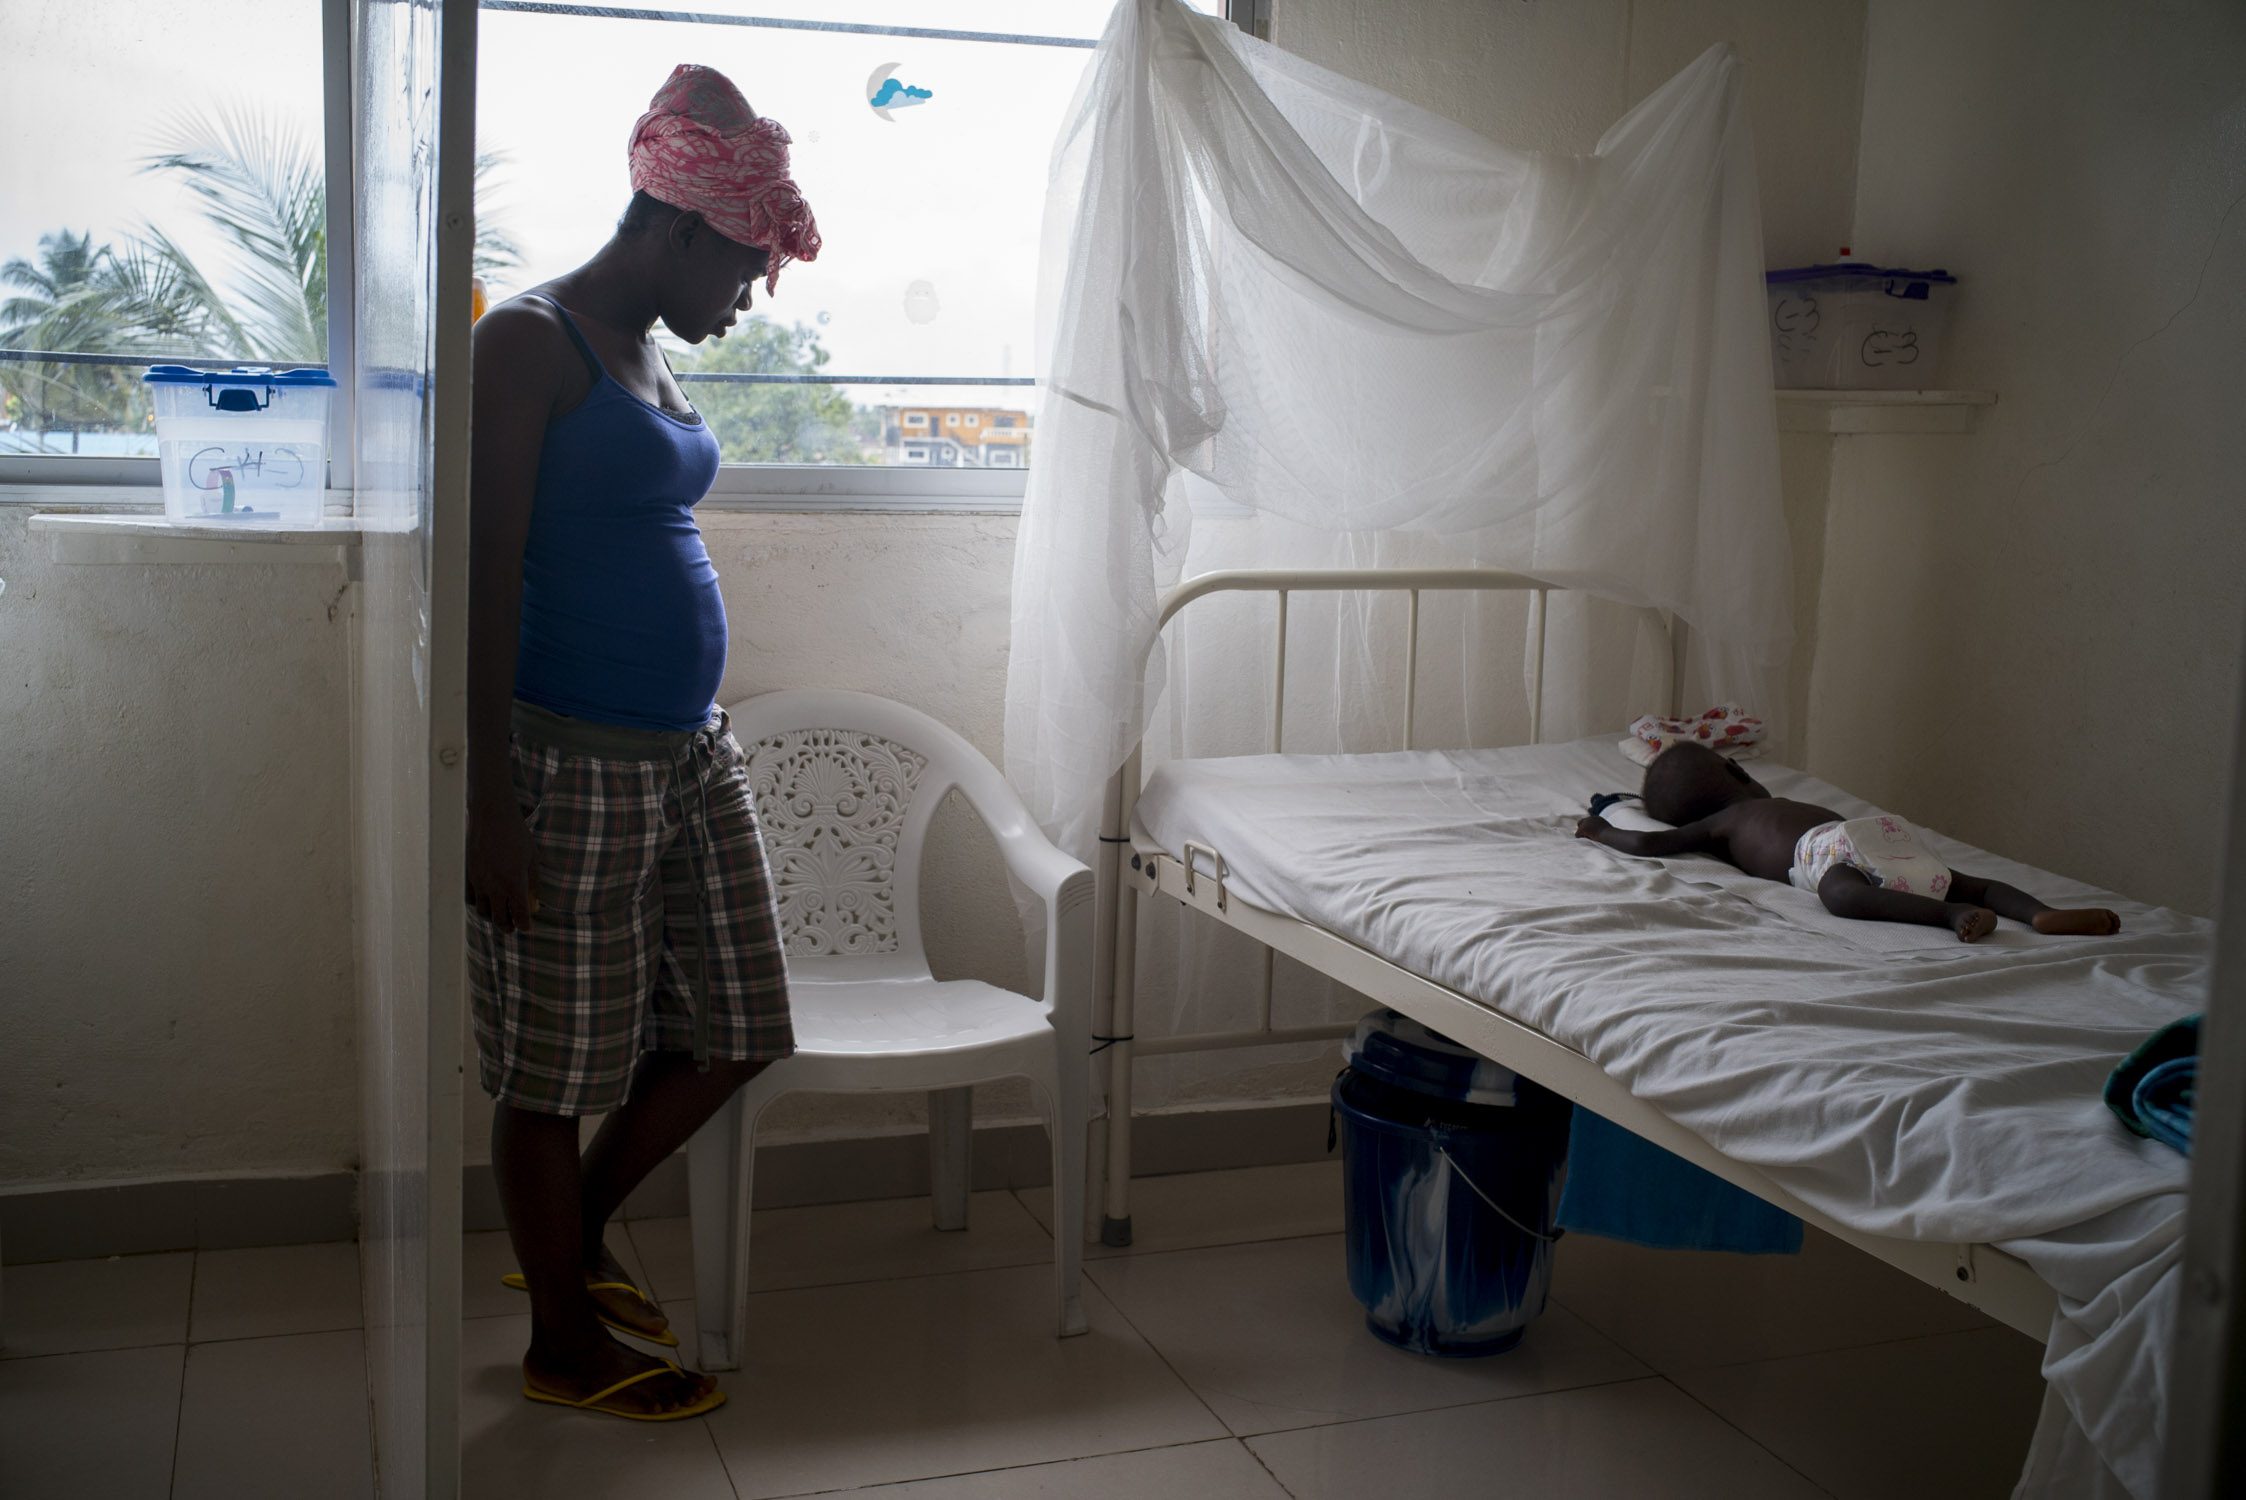  A mother stands bedside as her infants sleeps in the malnutrition ward of the MSF Hospital in Monrovia, Liberia. Sept. 27, 2016 